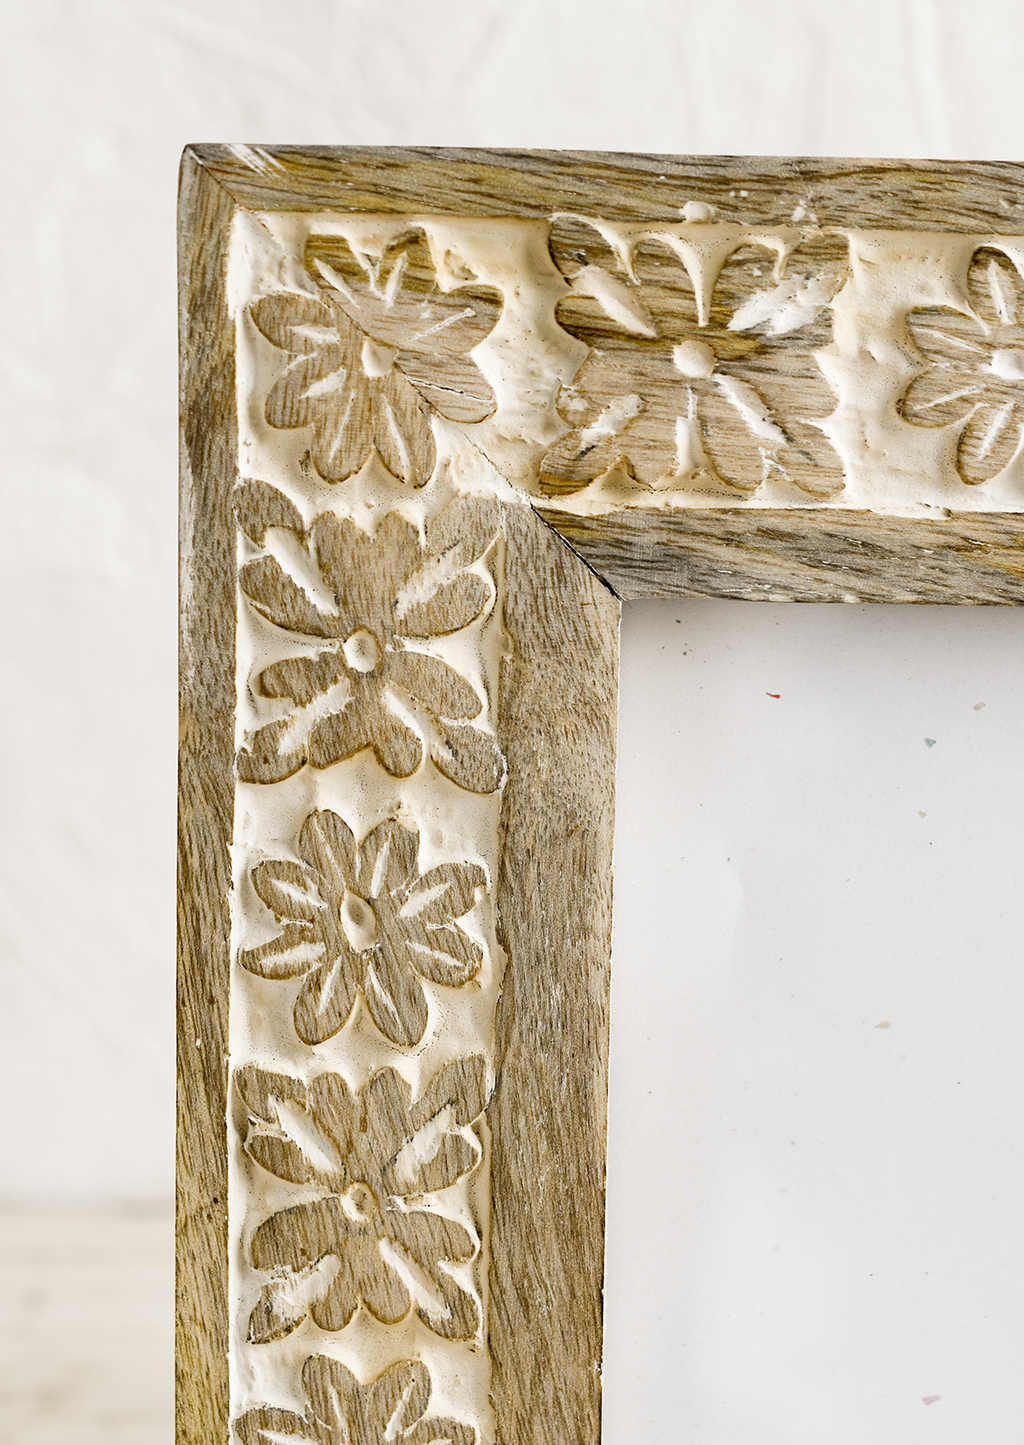 2: A wooden picture frame with carved whitewash floral design.